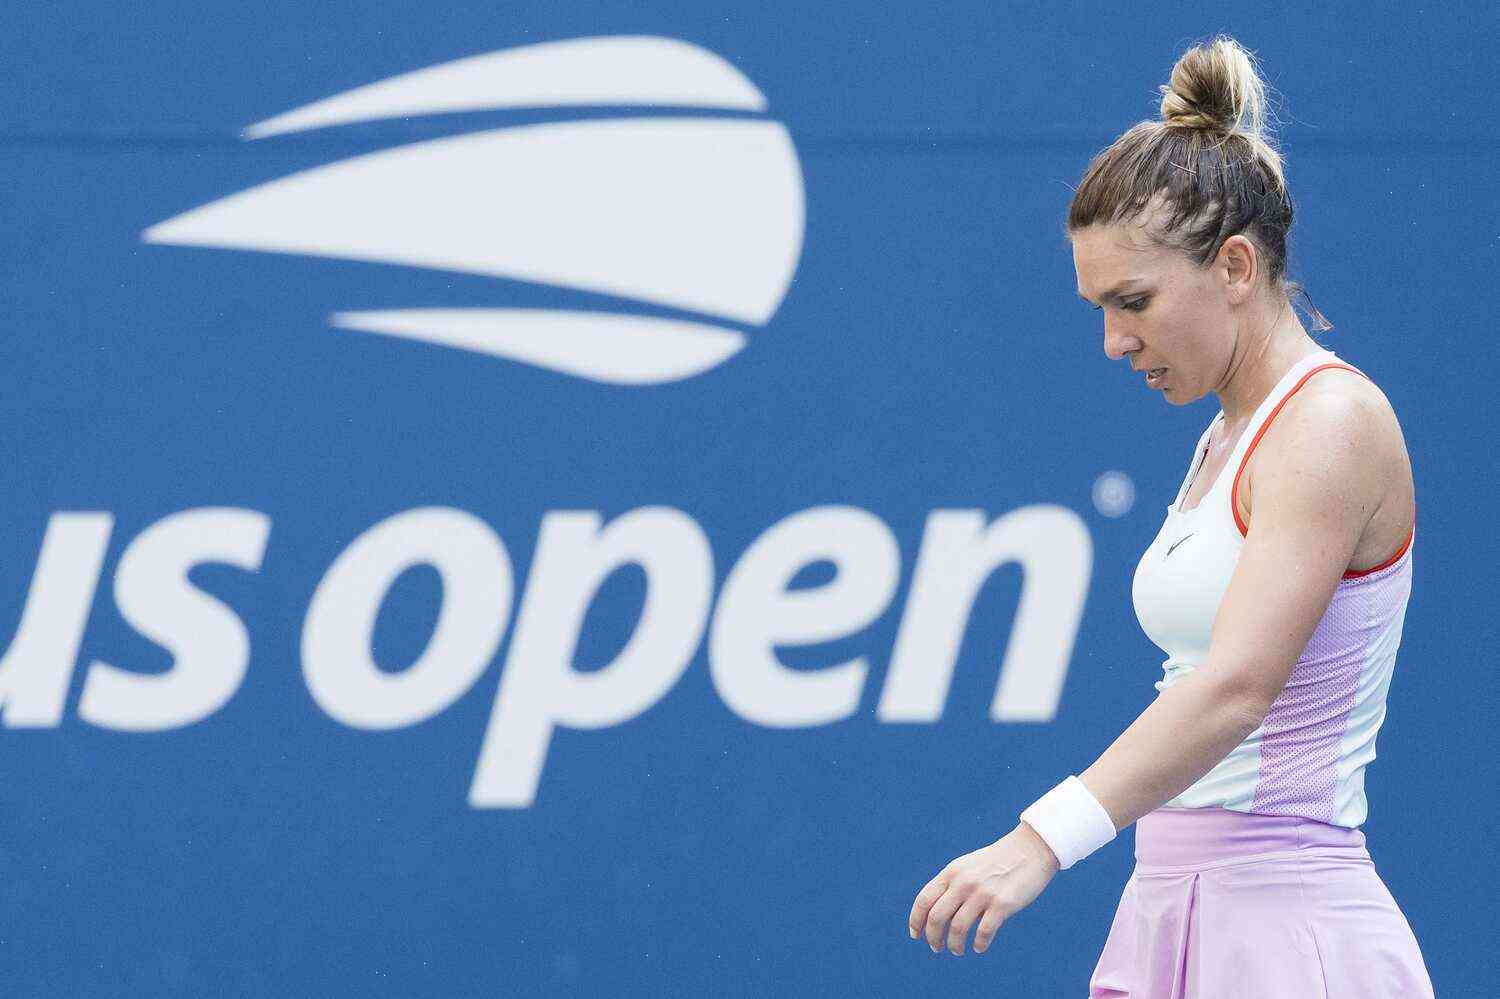 Simona Halep is being accused of a positive doping test